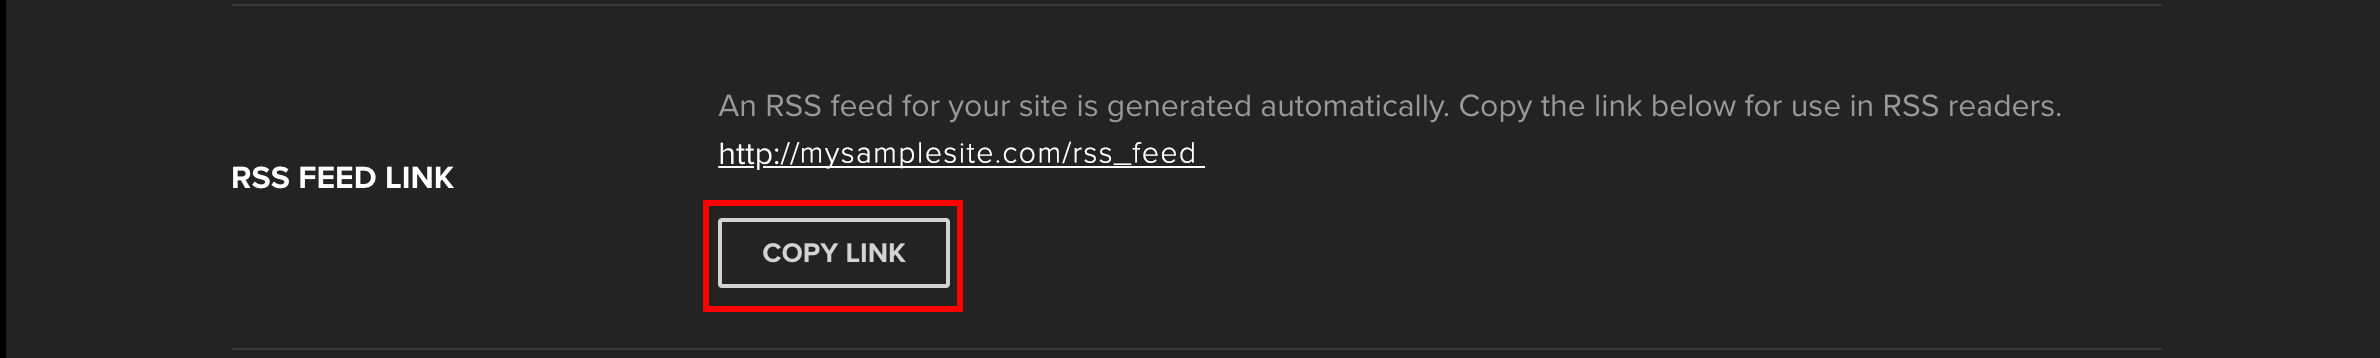 RSS_feed_2.png